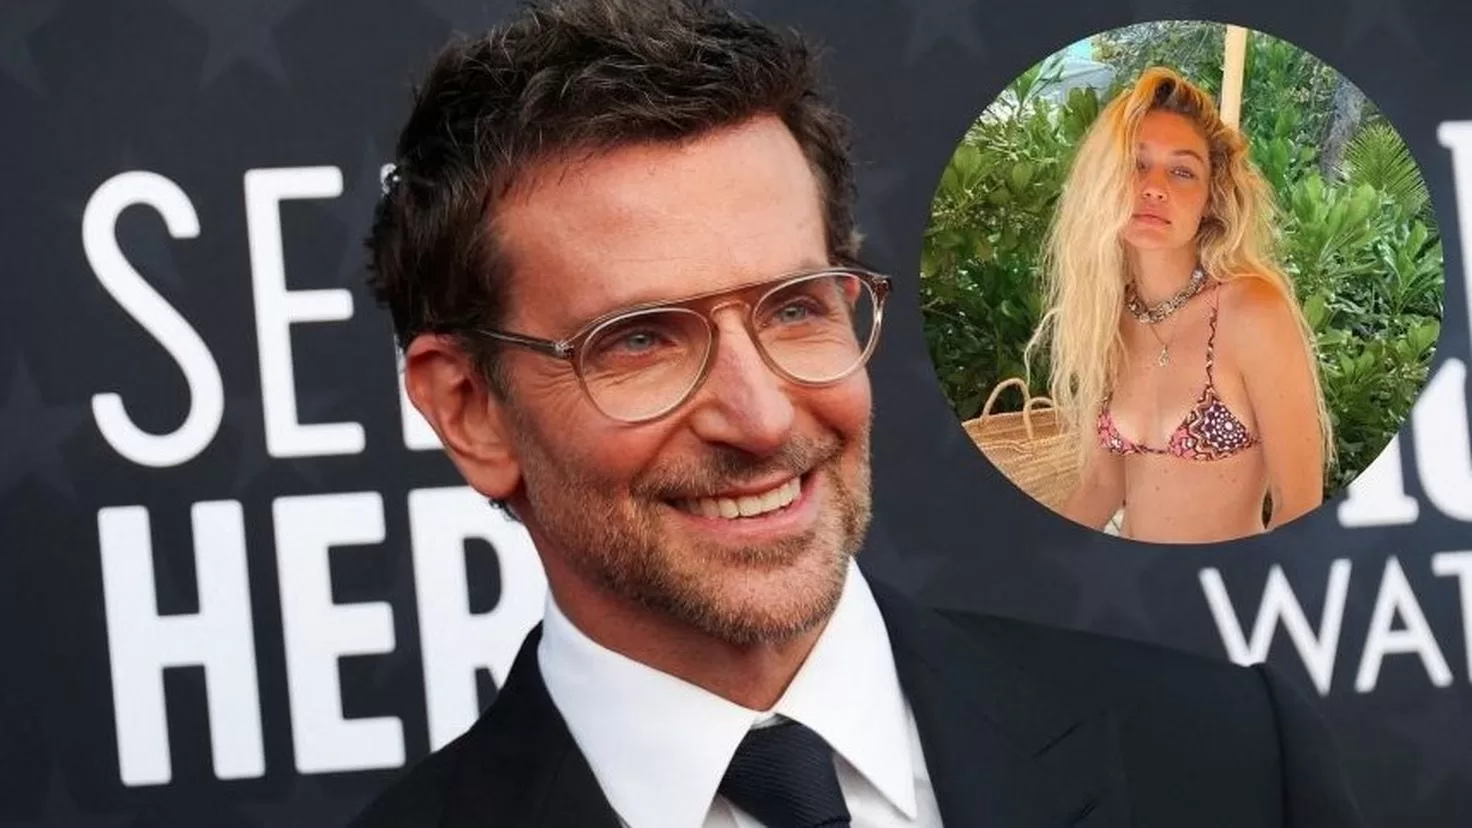 Bradley Cooper and Gigi Hadid confirm their relationship
